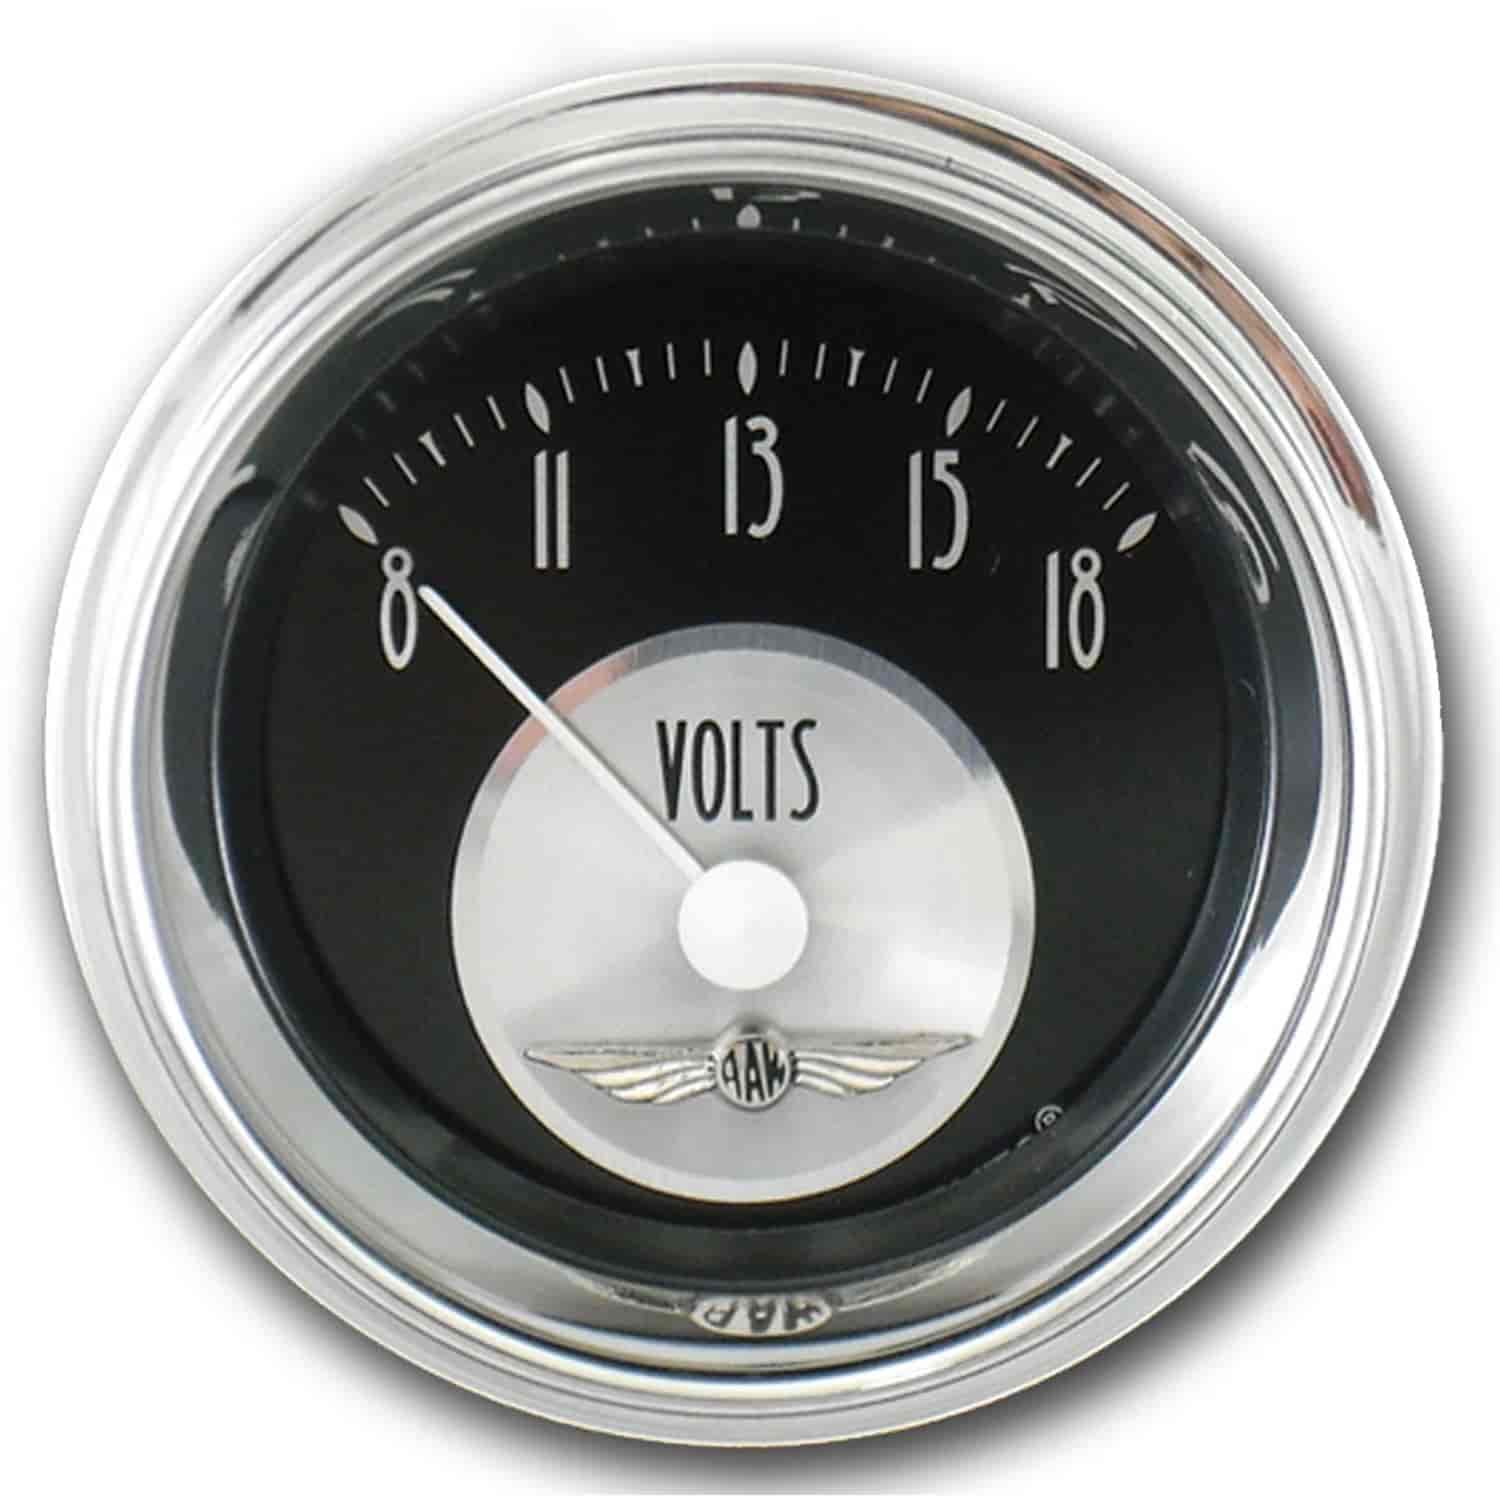 All American Tradition Voltmeter 2-1/8" Electrical